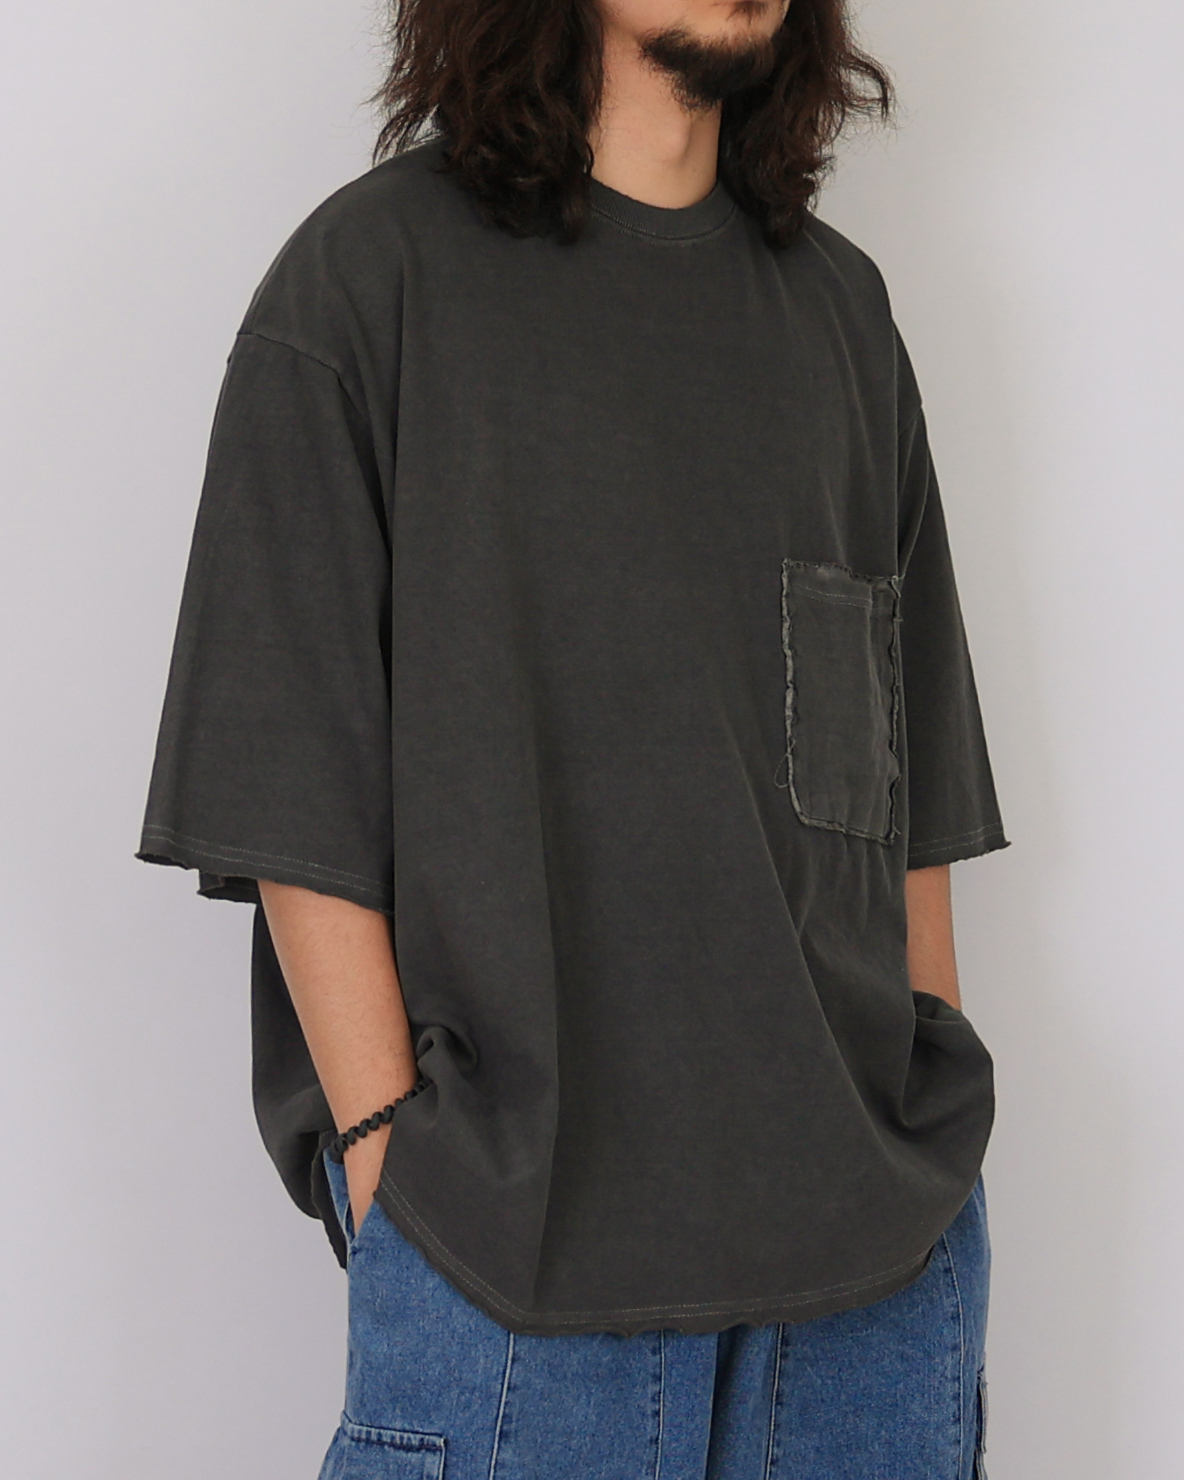 Pigments Over Pocket T-Shirts (Charcoal/Gray)